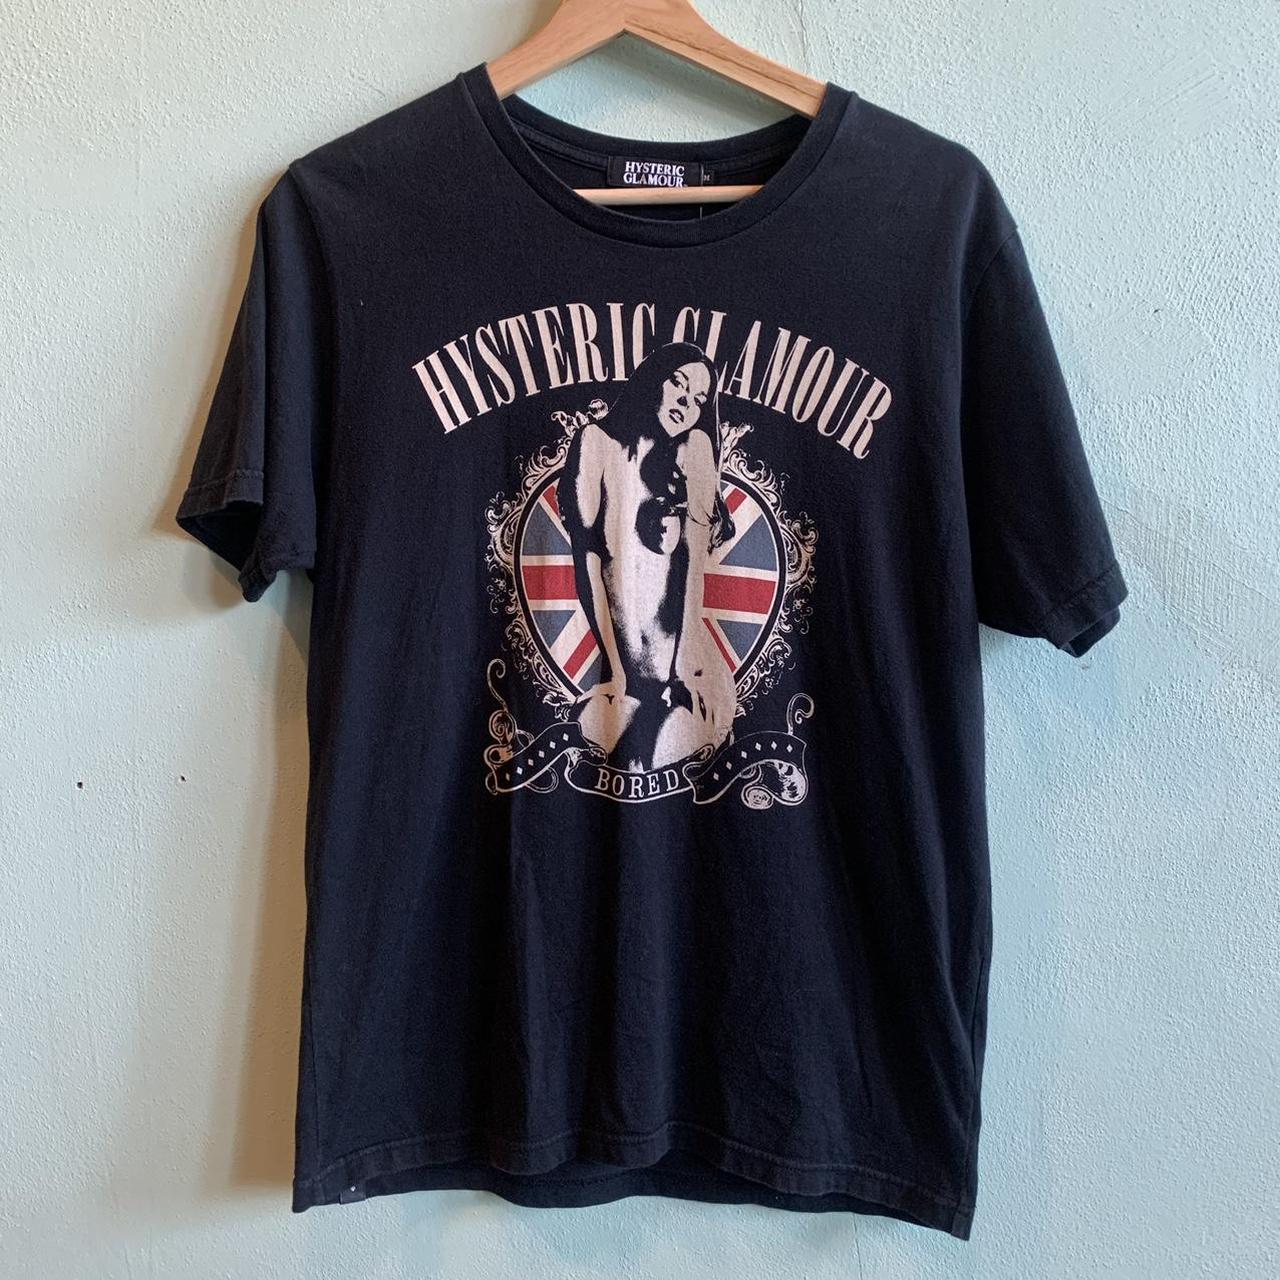 Hysteric Glamour “keep Britain sexy” tee with nude... - Depop